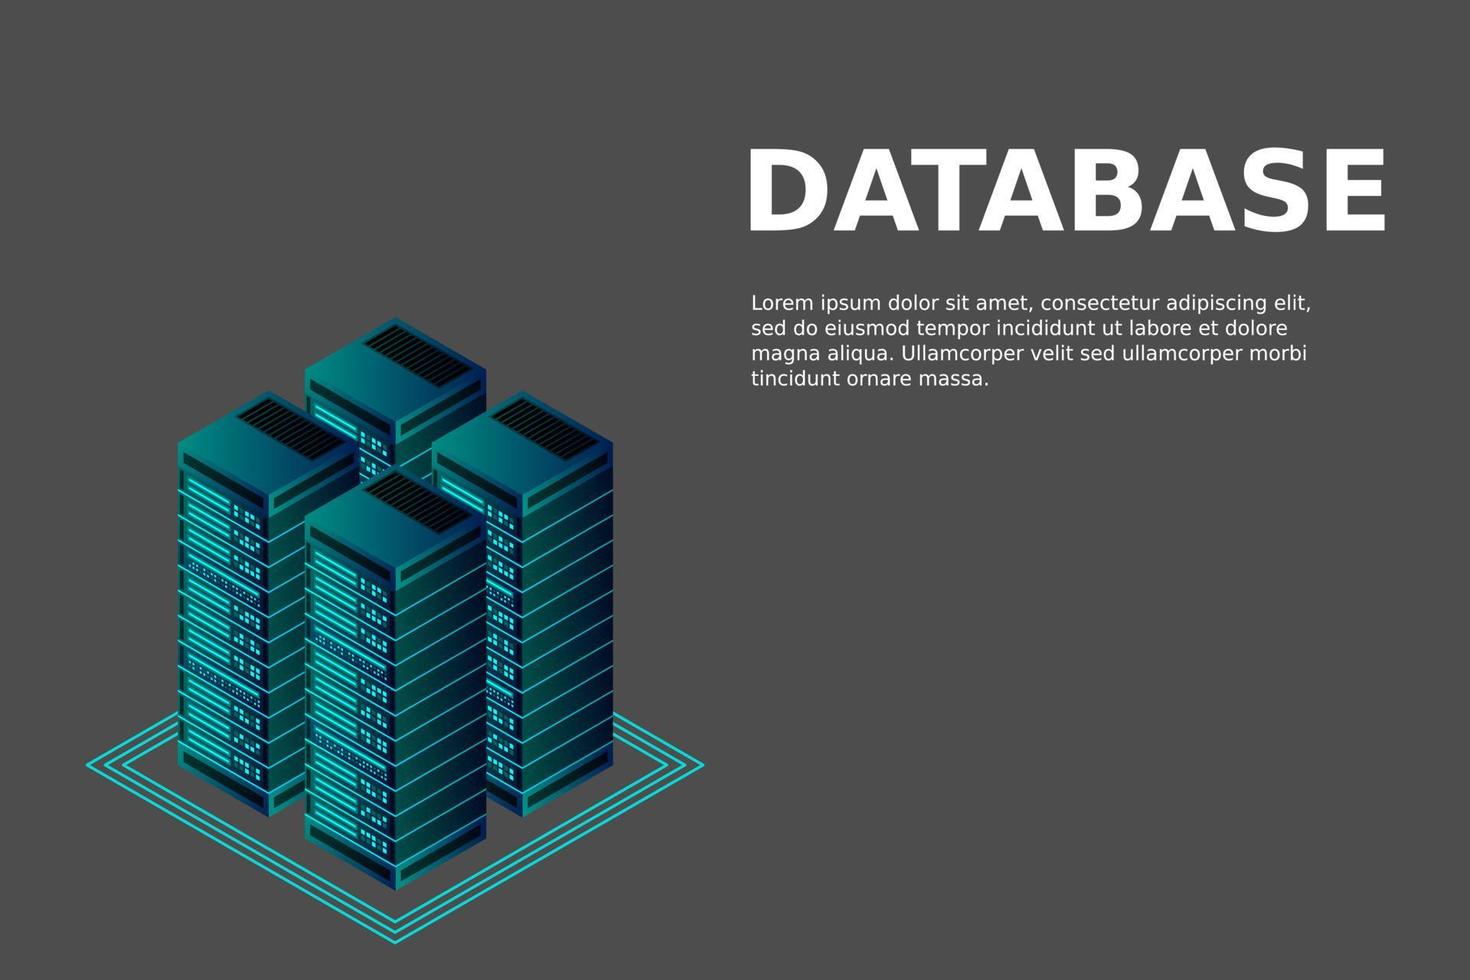 Server room isometric vector, futuristic technology of data protection and processing vector